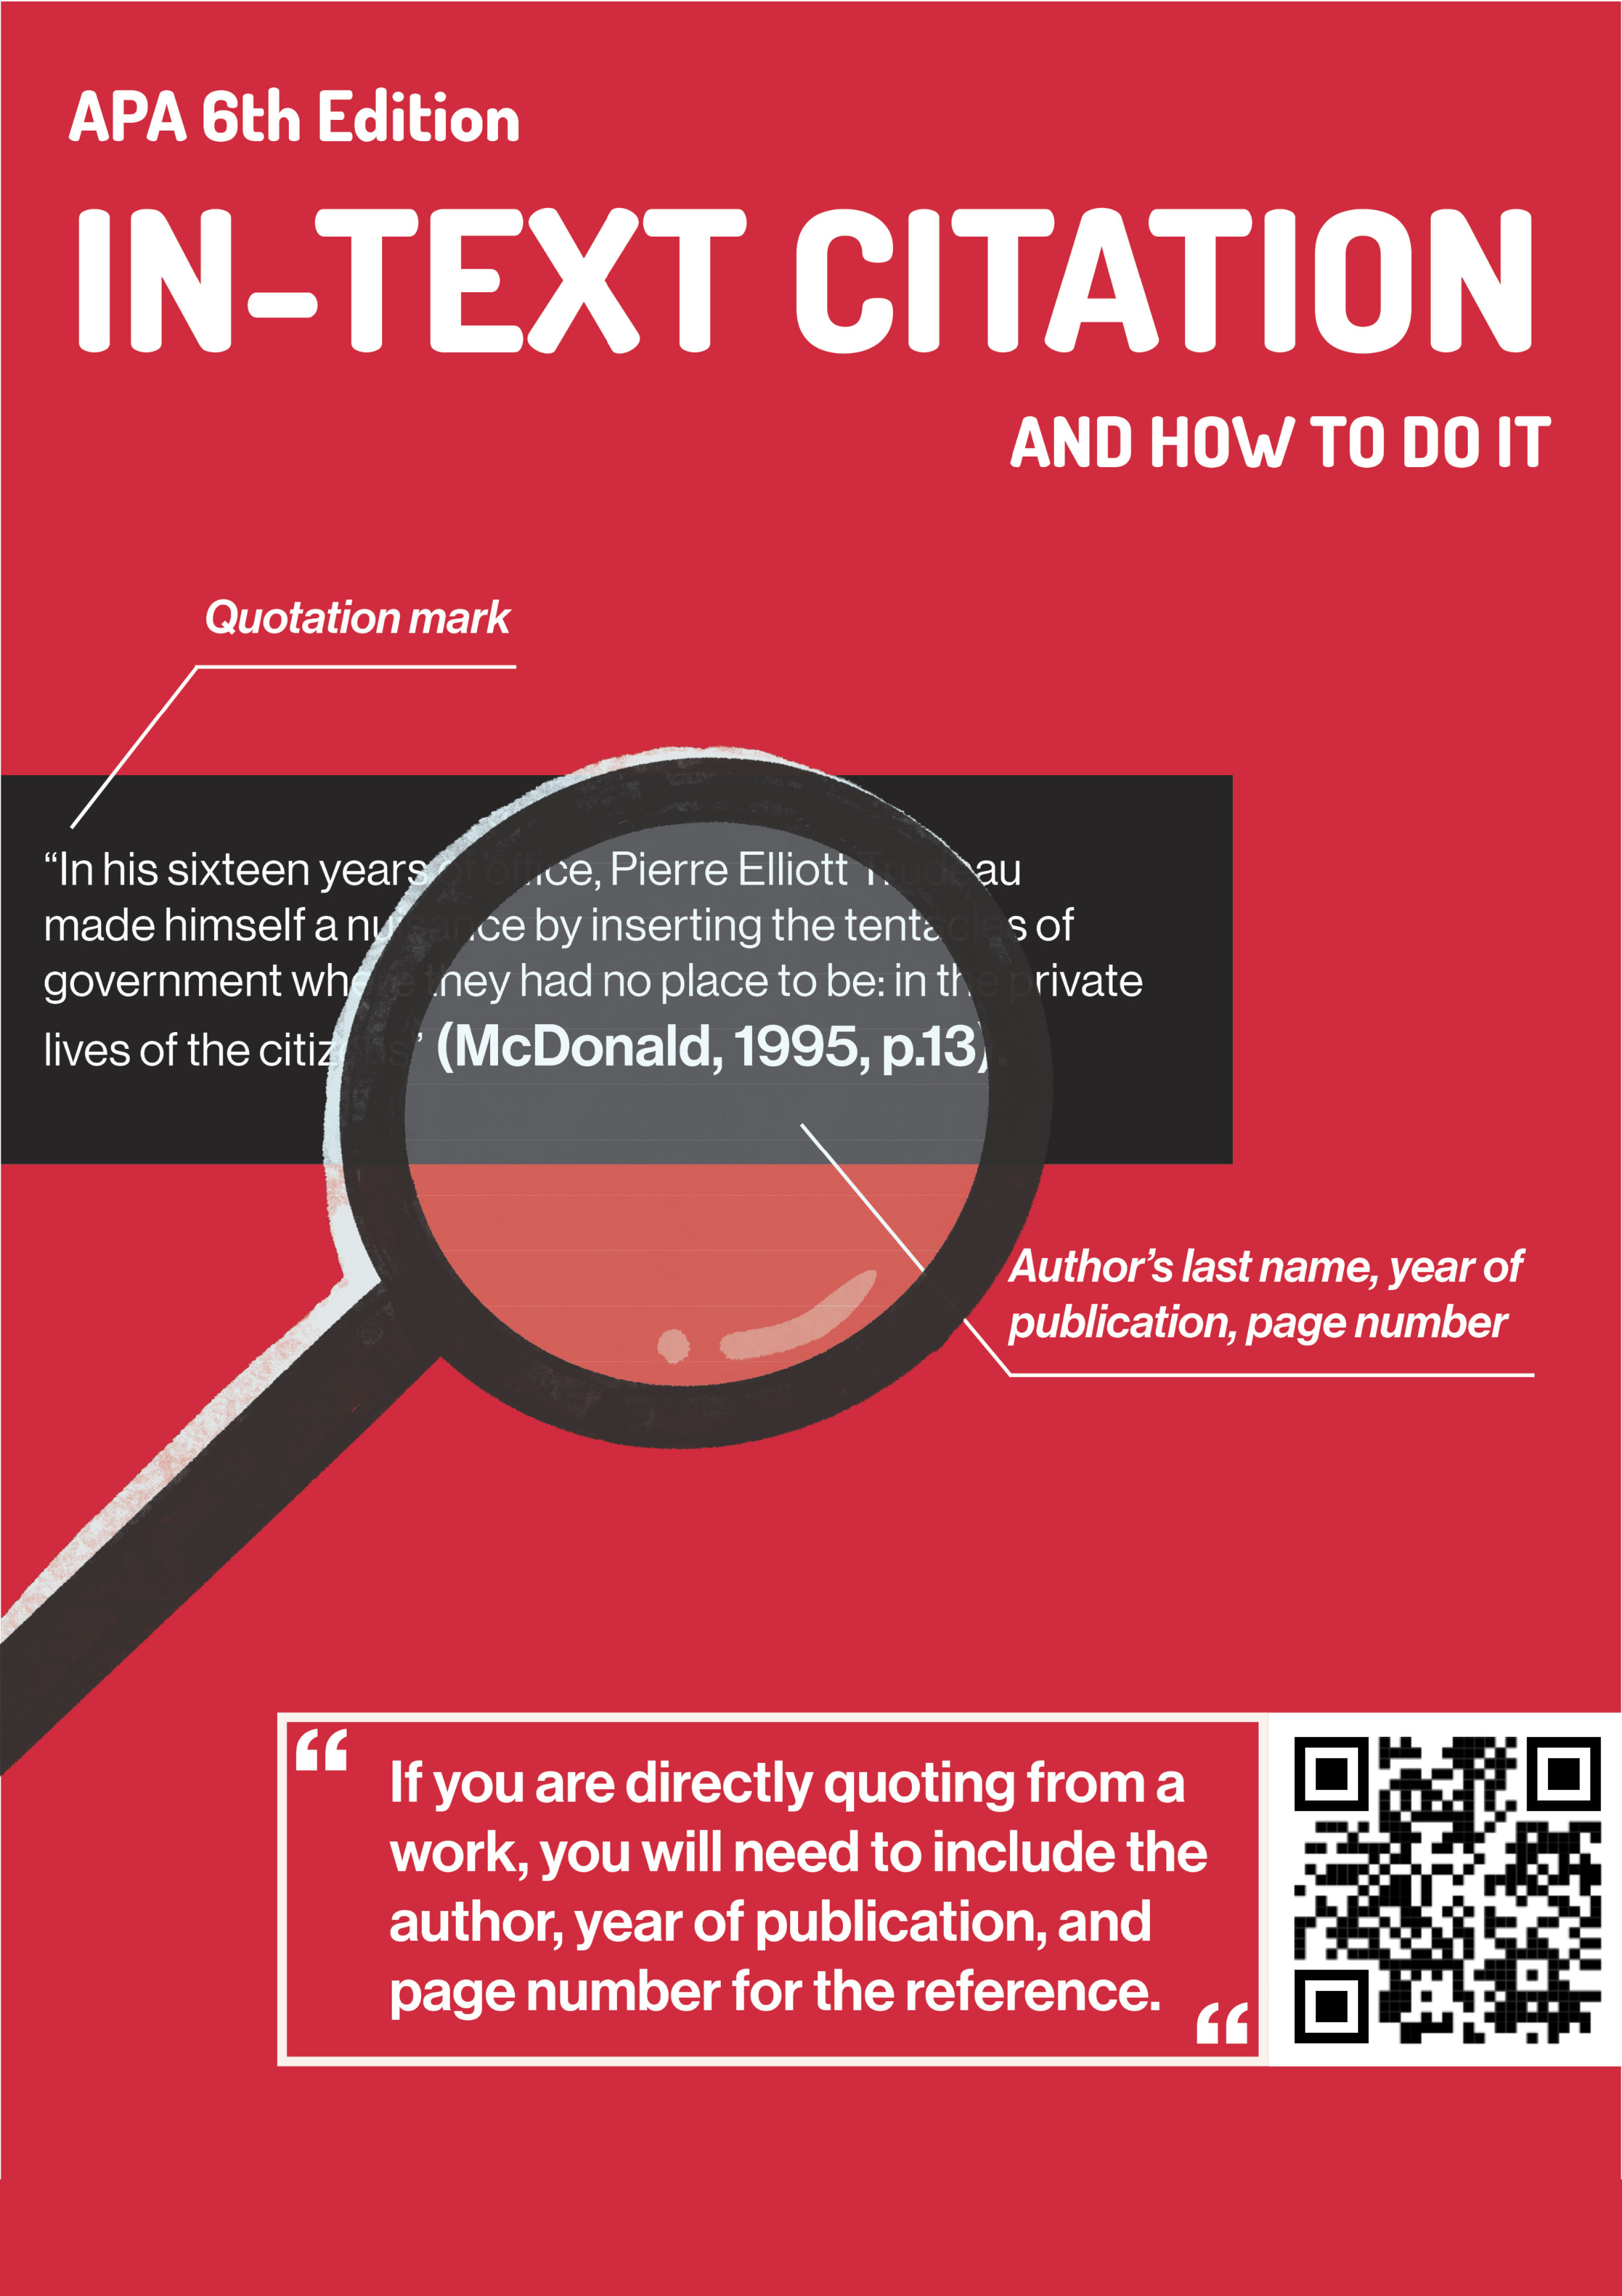 In-text citation poster